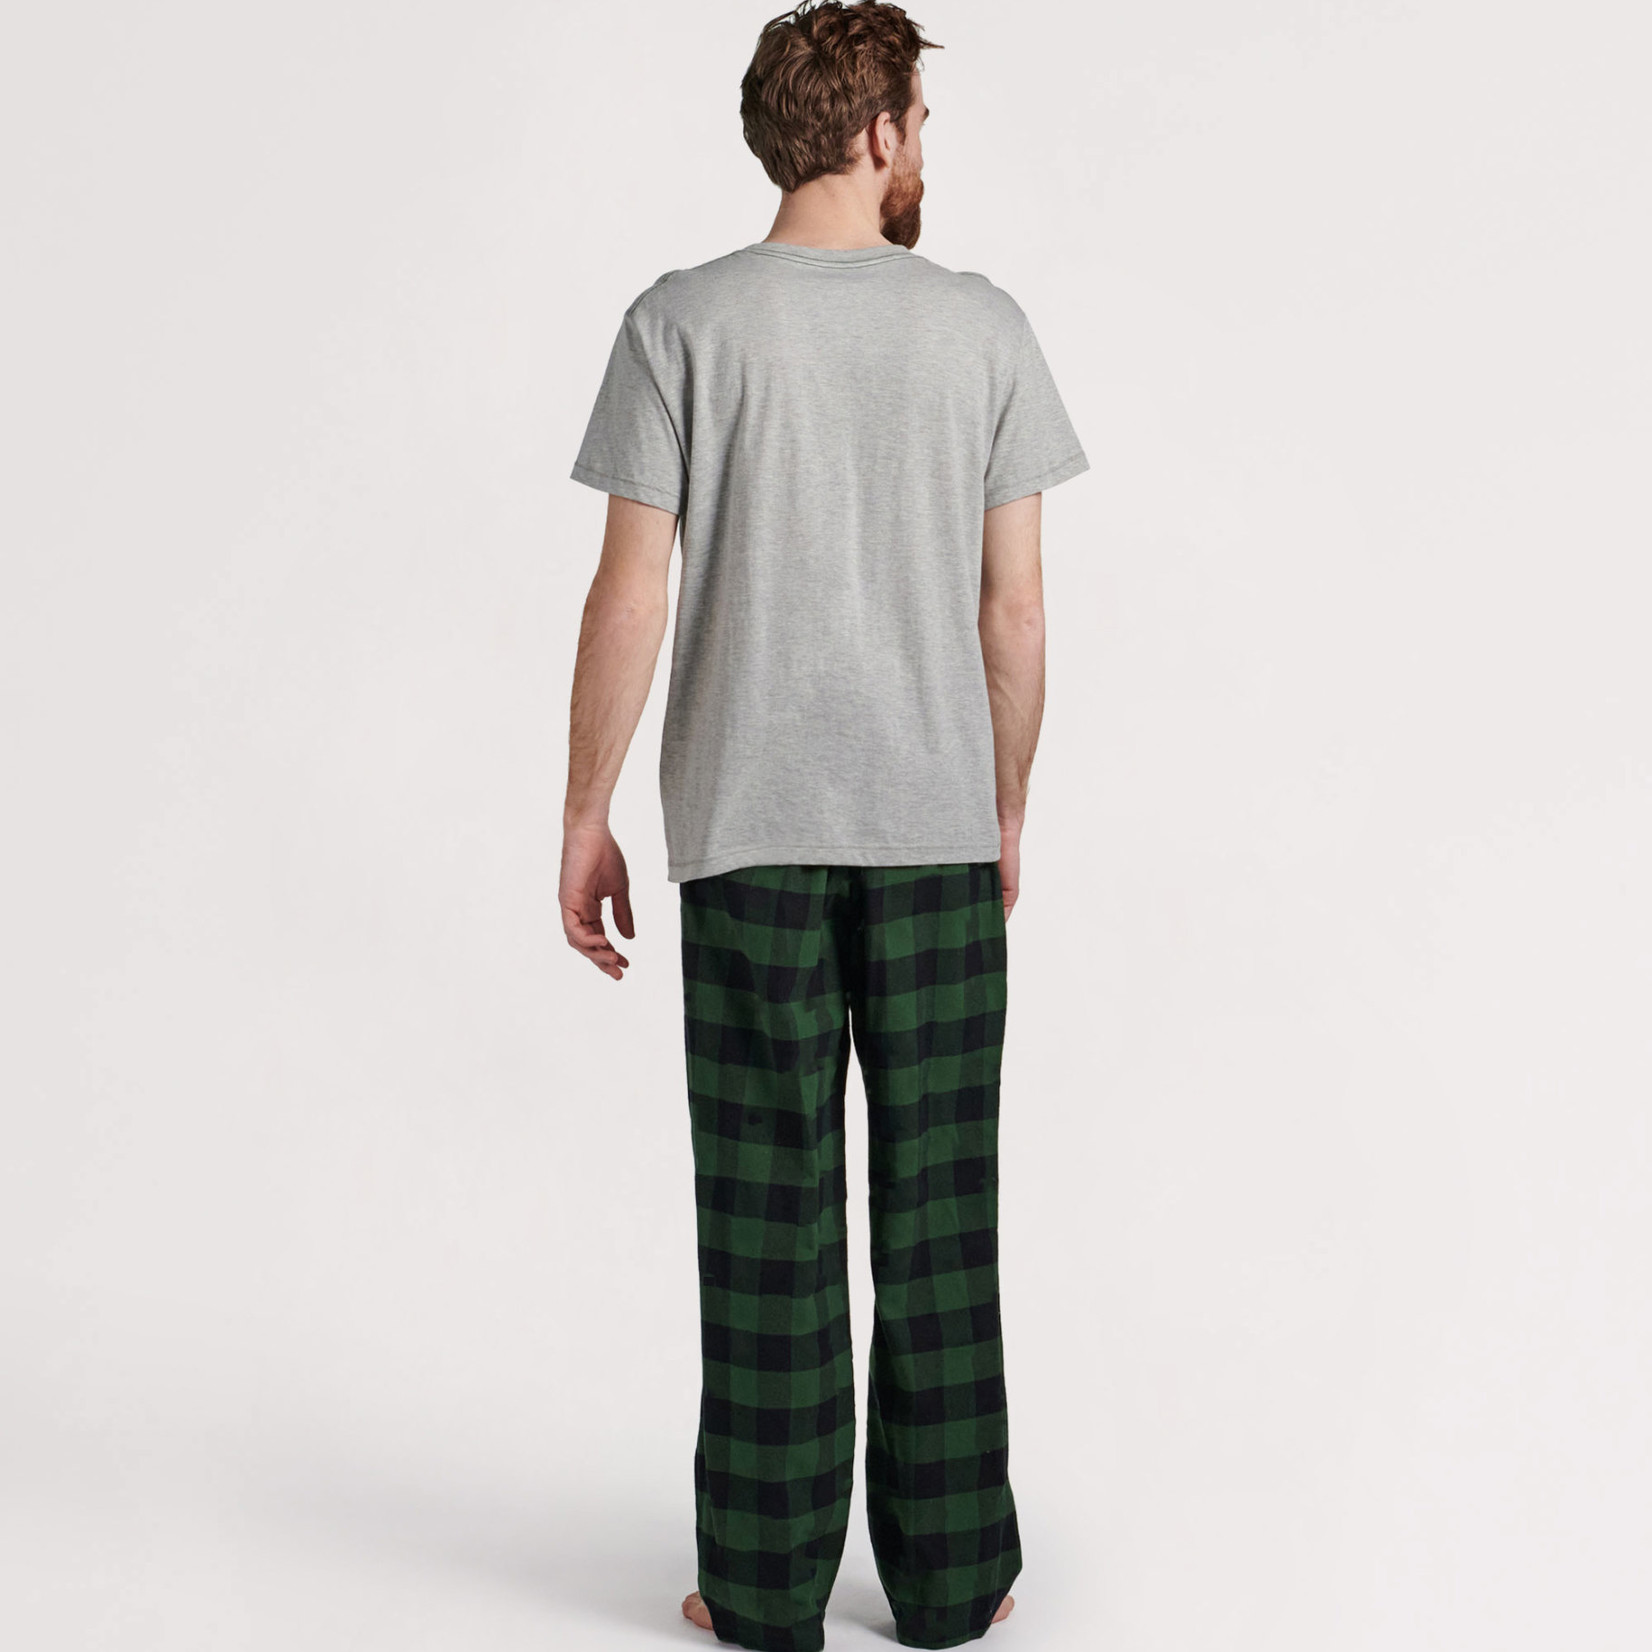 Little Blue House Forest Green Plaid Men's Flannel Pajama